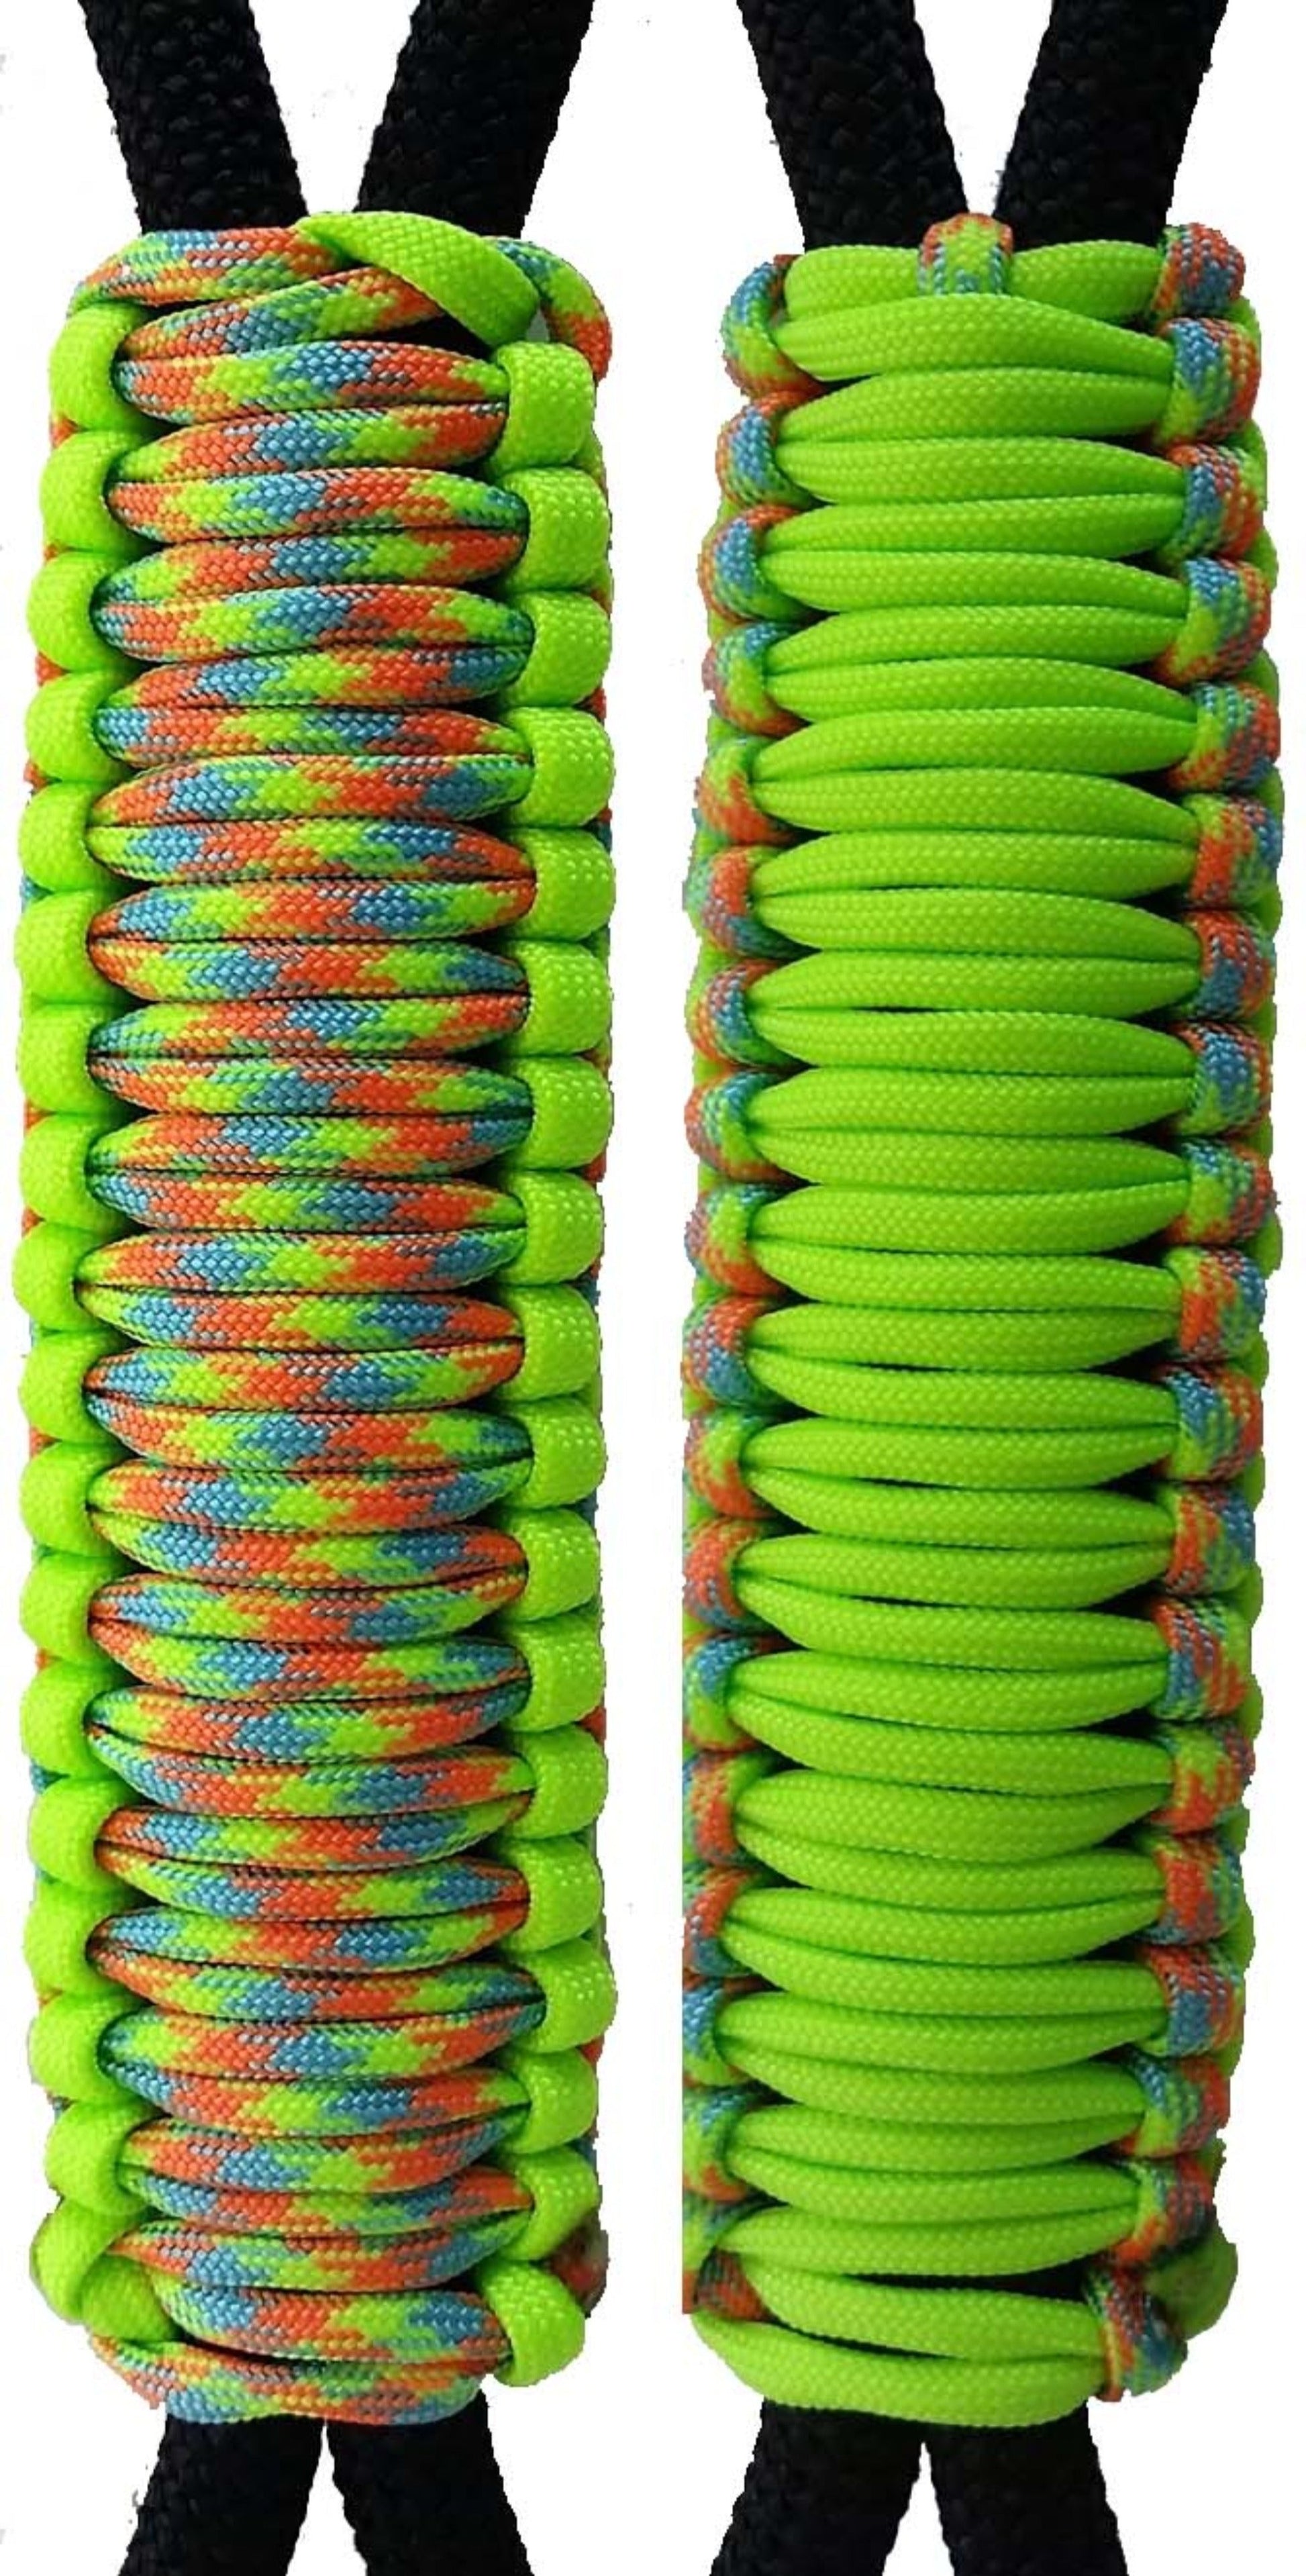 Best Yeti Paracord Cup Handles for sale in Mount Dora, Florida for